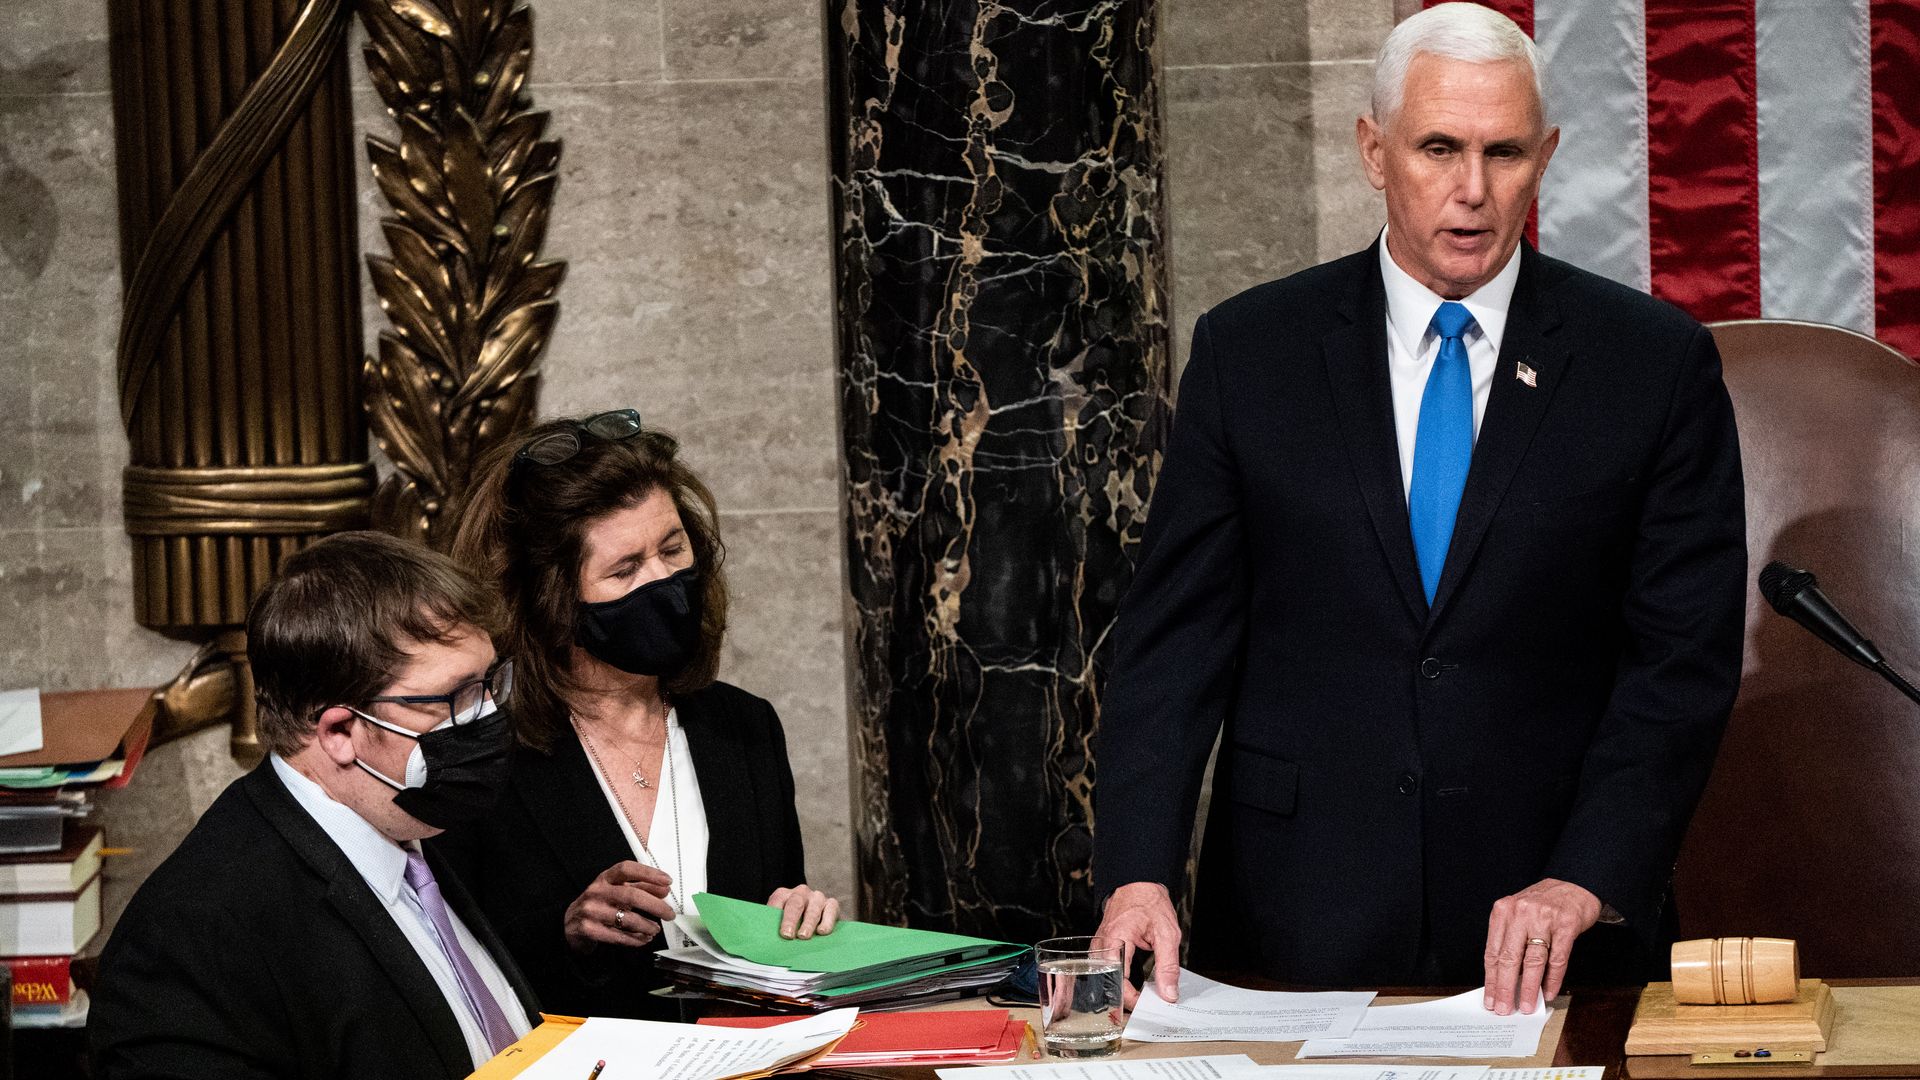 Former Vice President Mike Pence presiding over a joint session of Congress to count the Electoral College votes on Jan. 6, 2021.